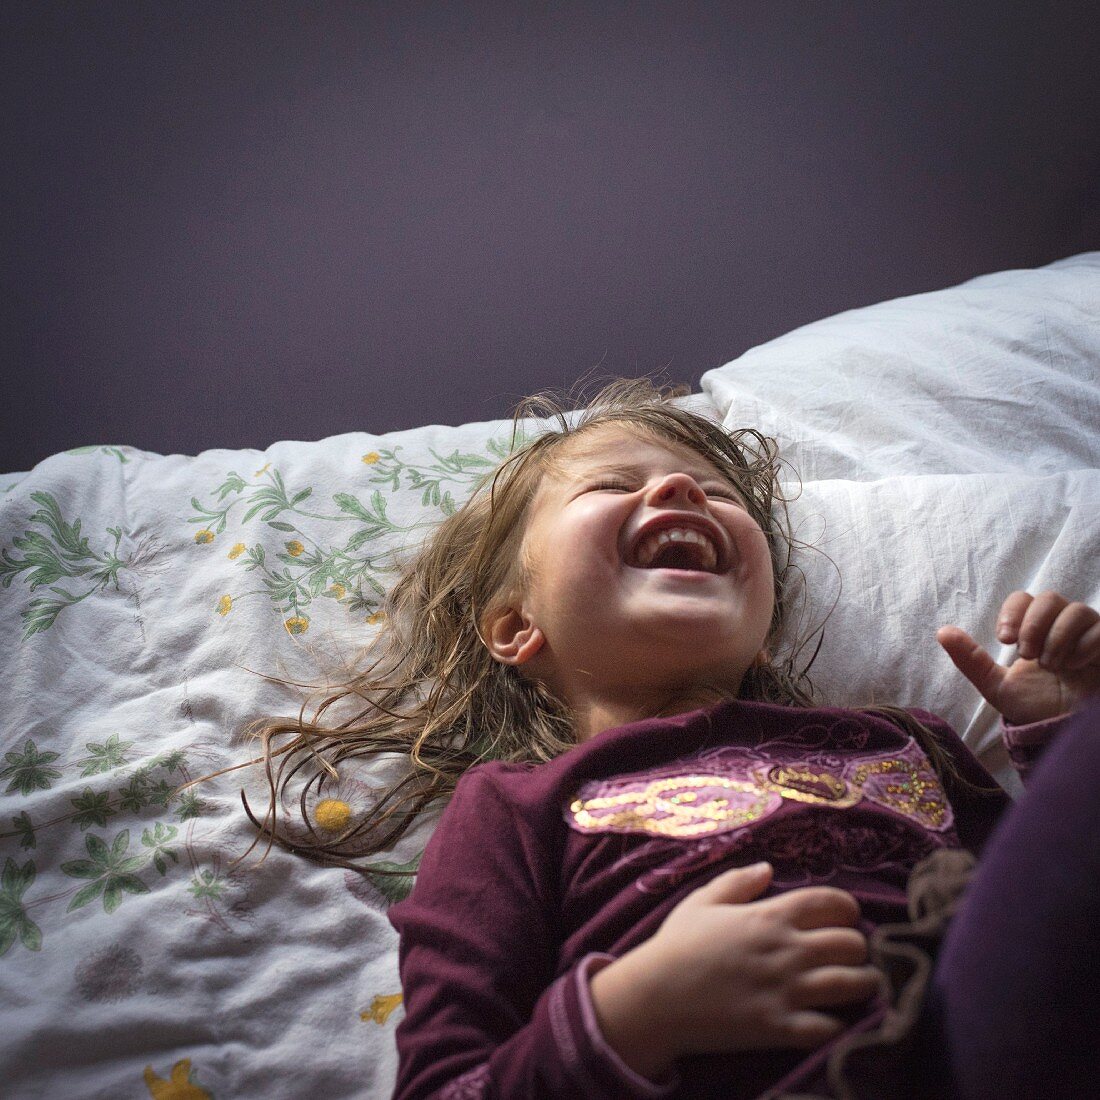 A laughing little girl in pyjamas lying on a bed